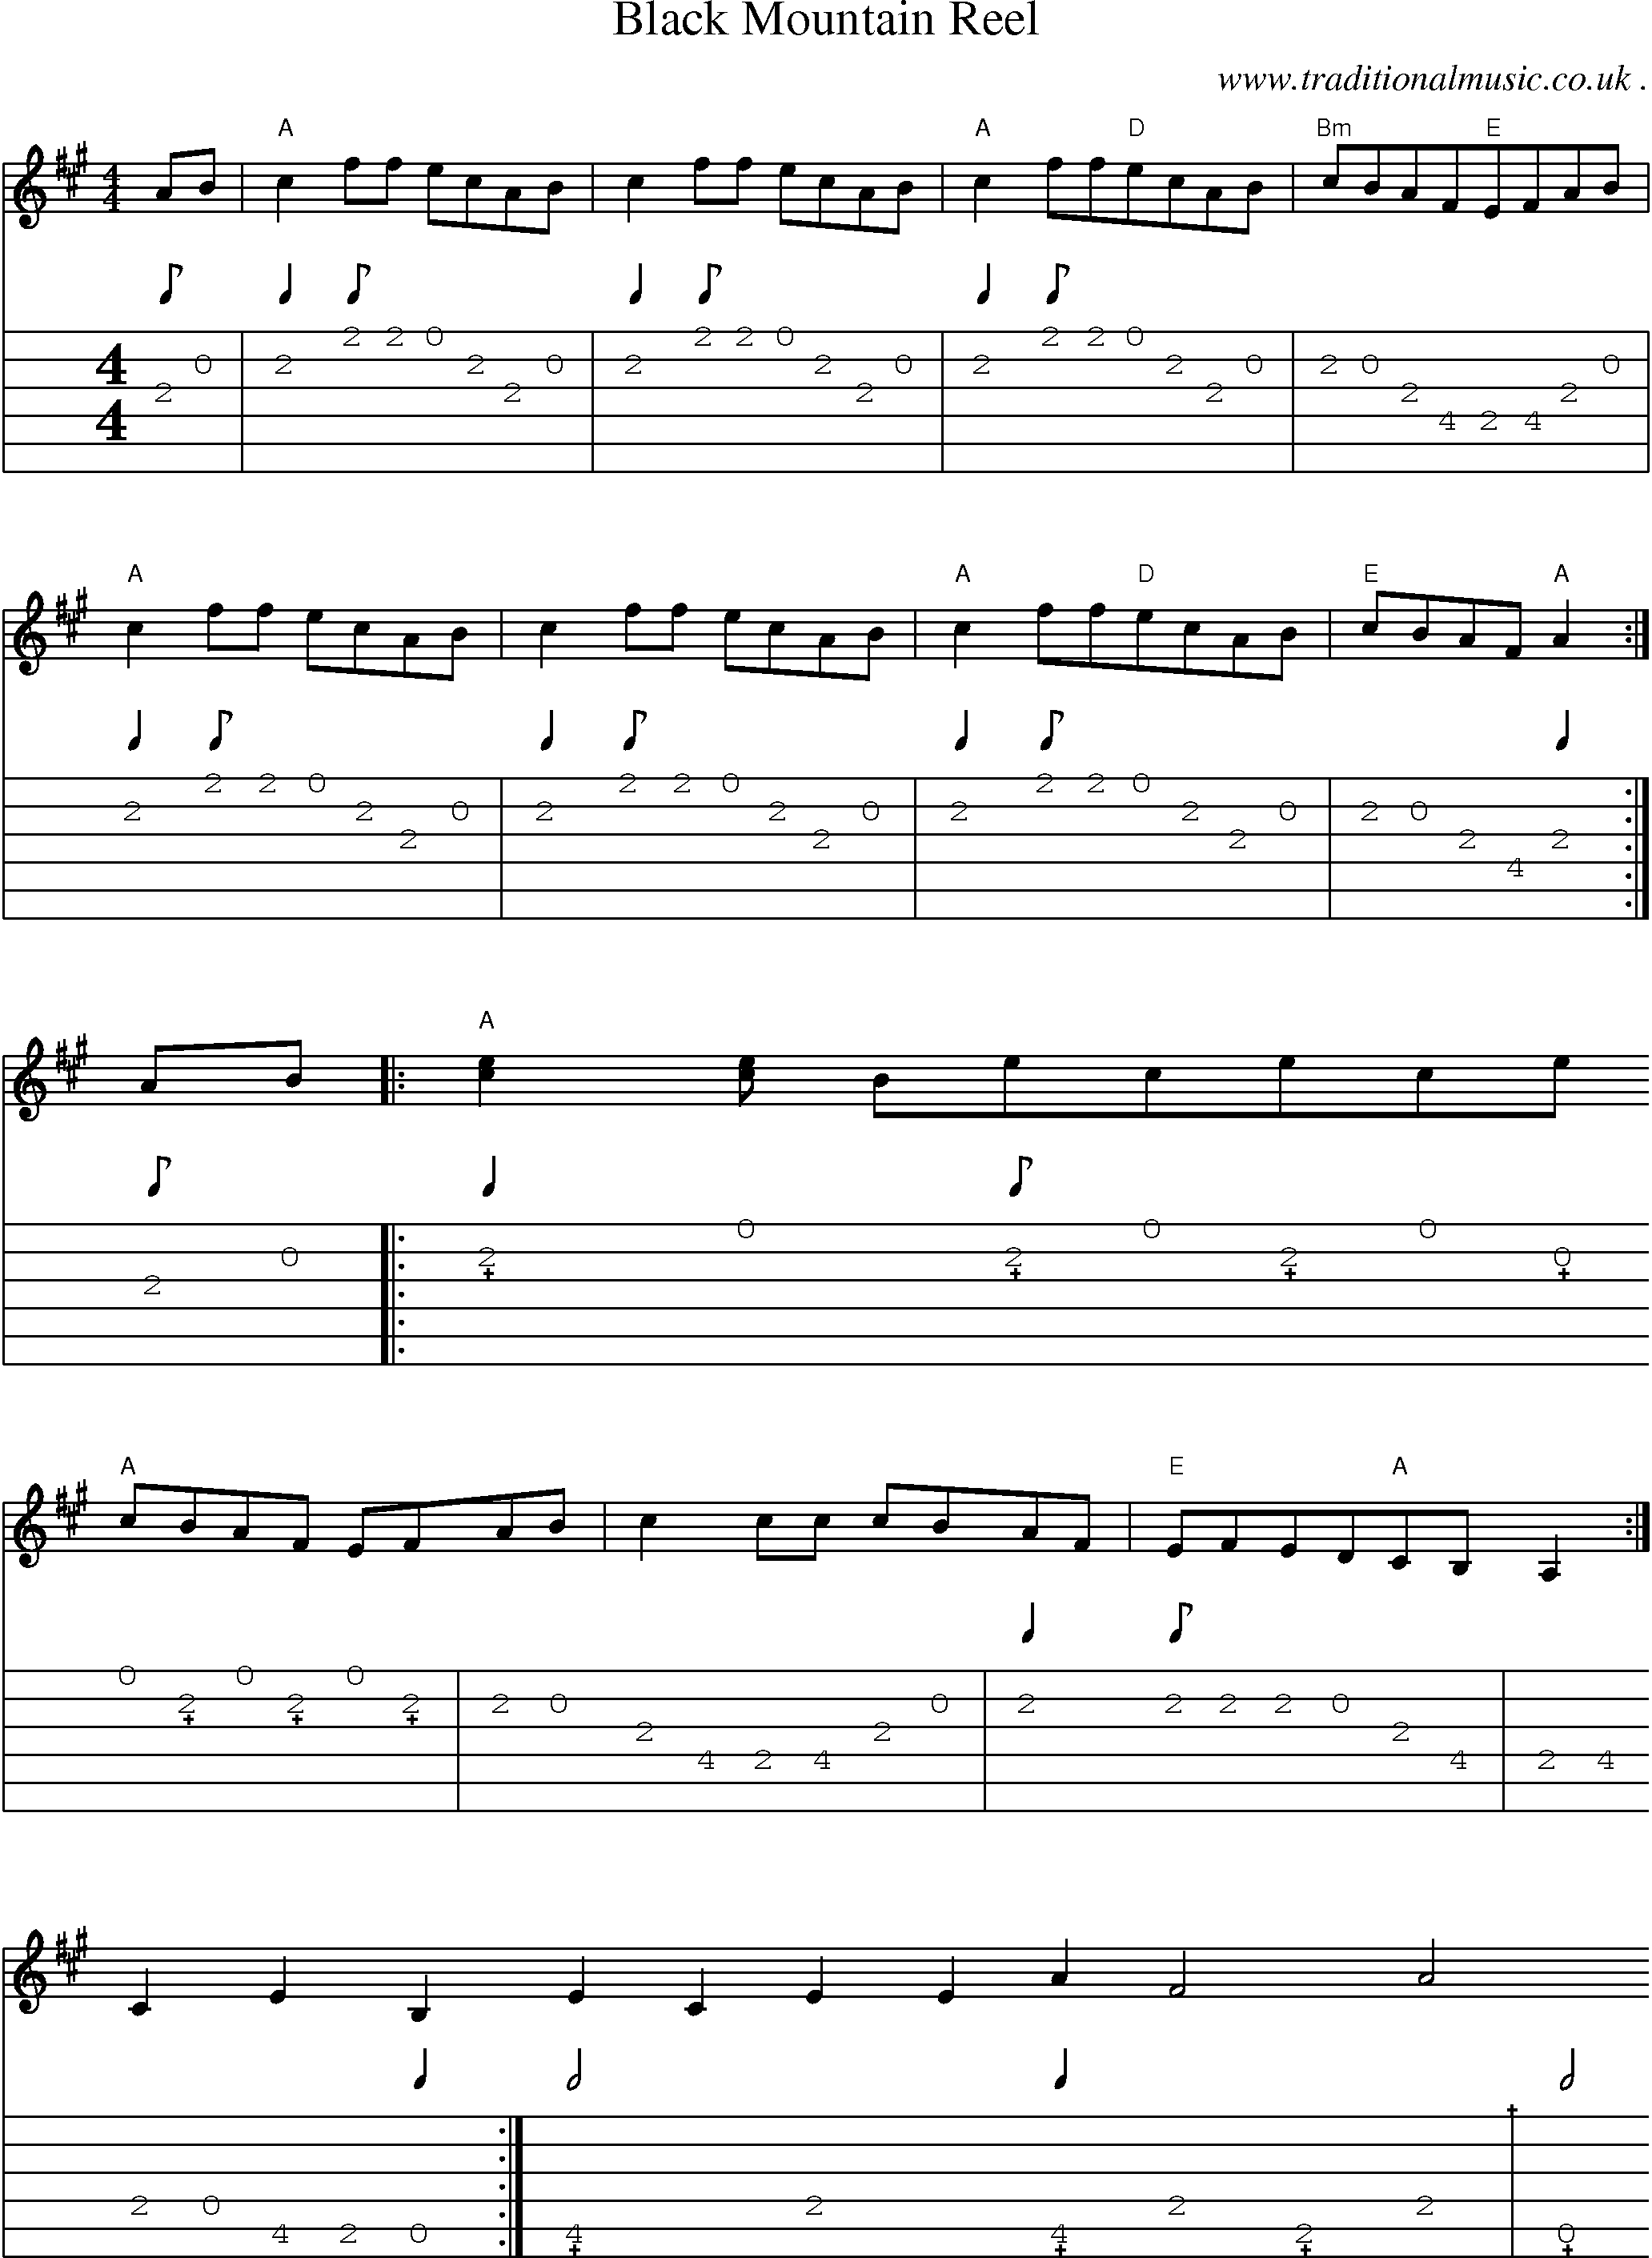 Sheet-Music and Guitar Tabs for Black Mountain Reel